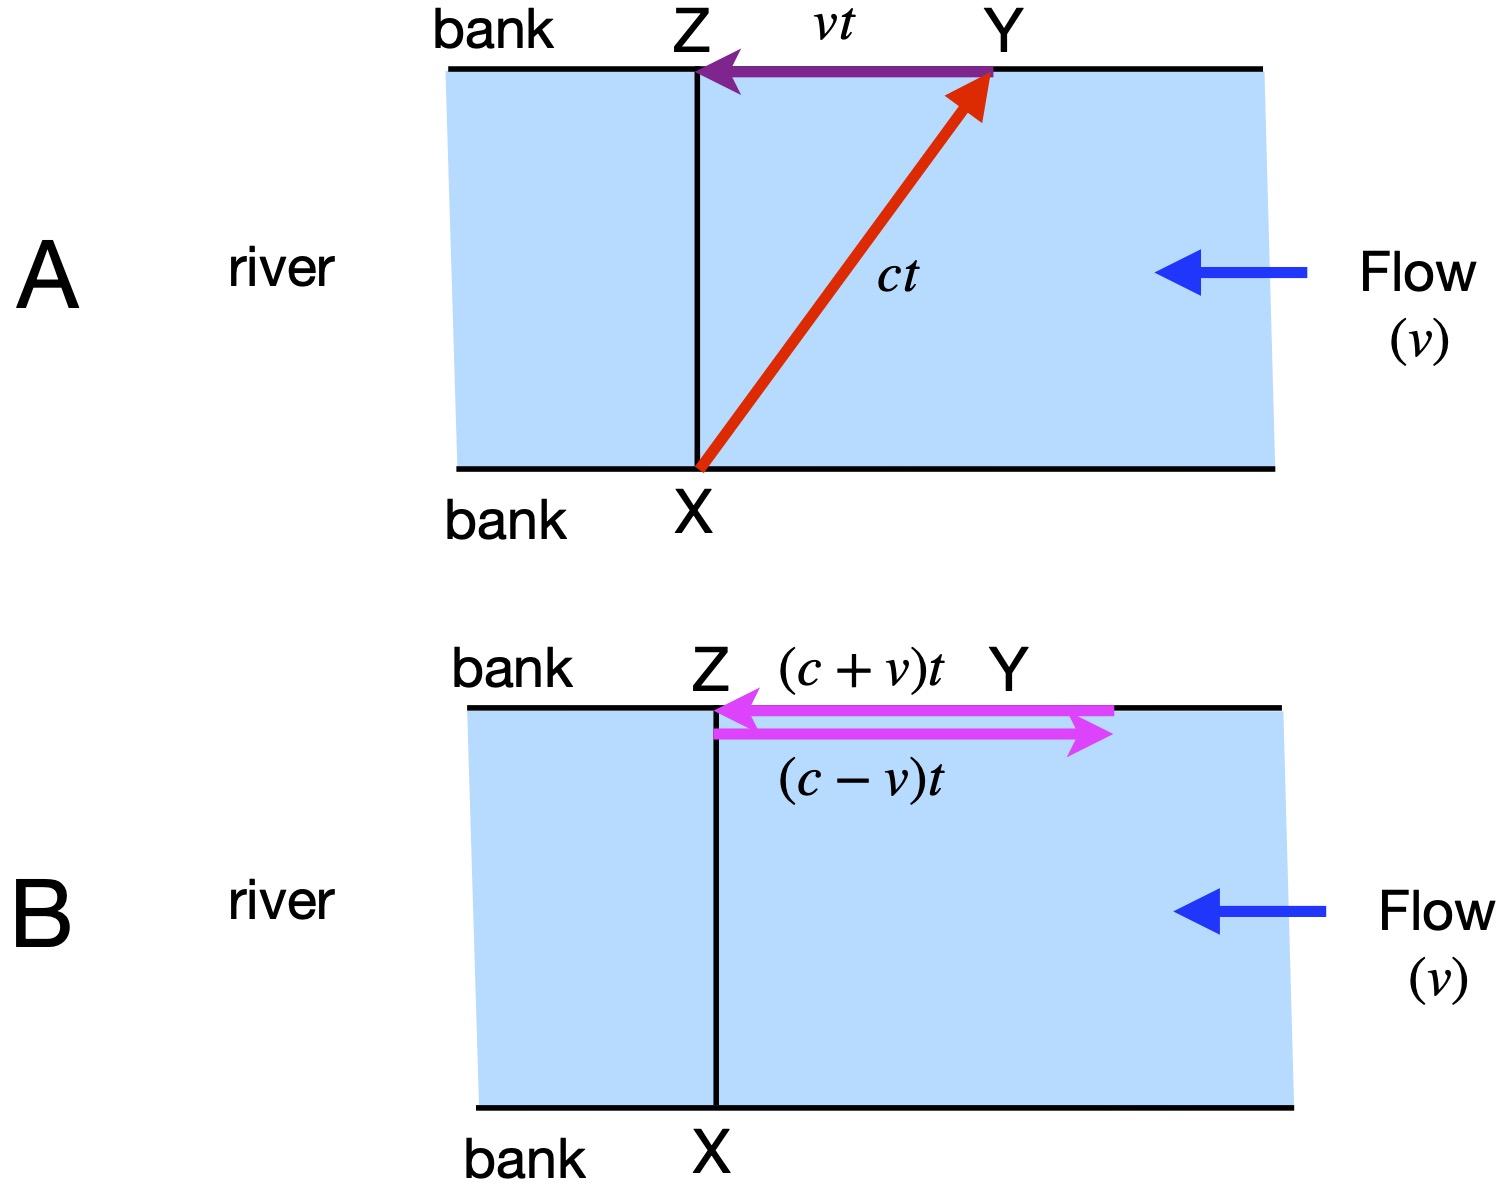 Michelson-Morley theory illustrated with swimmers in a river